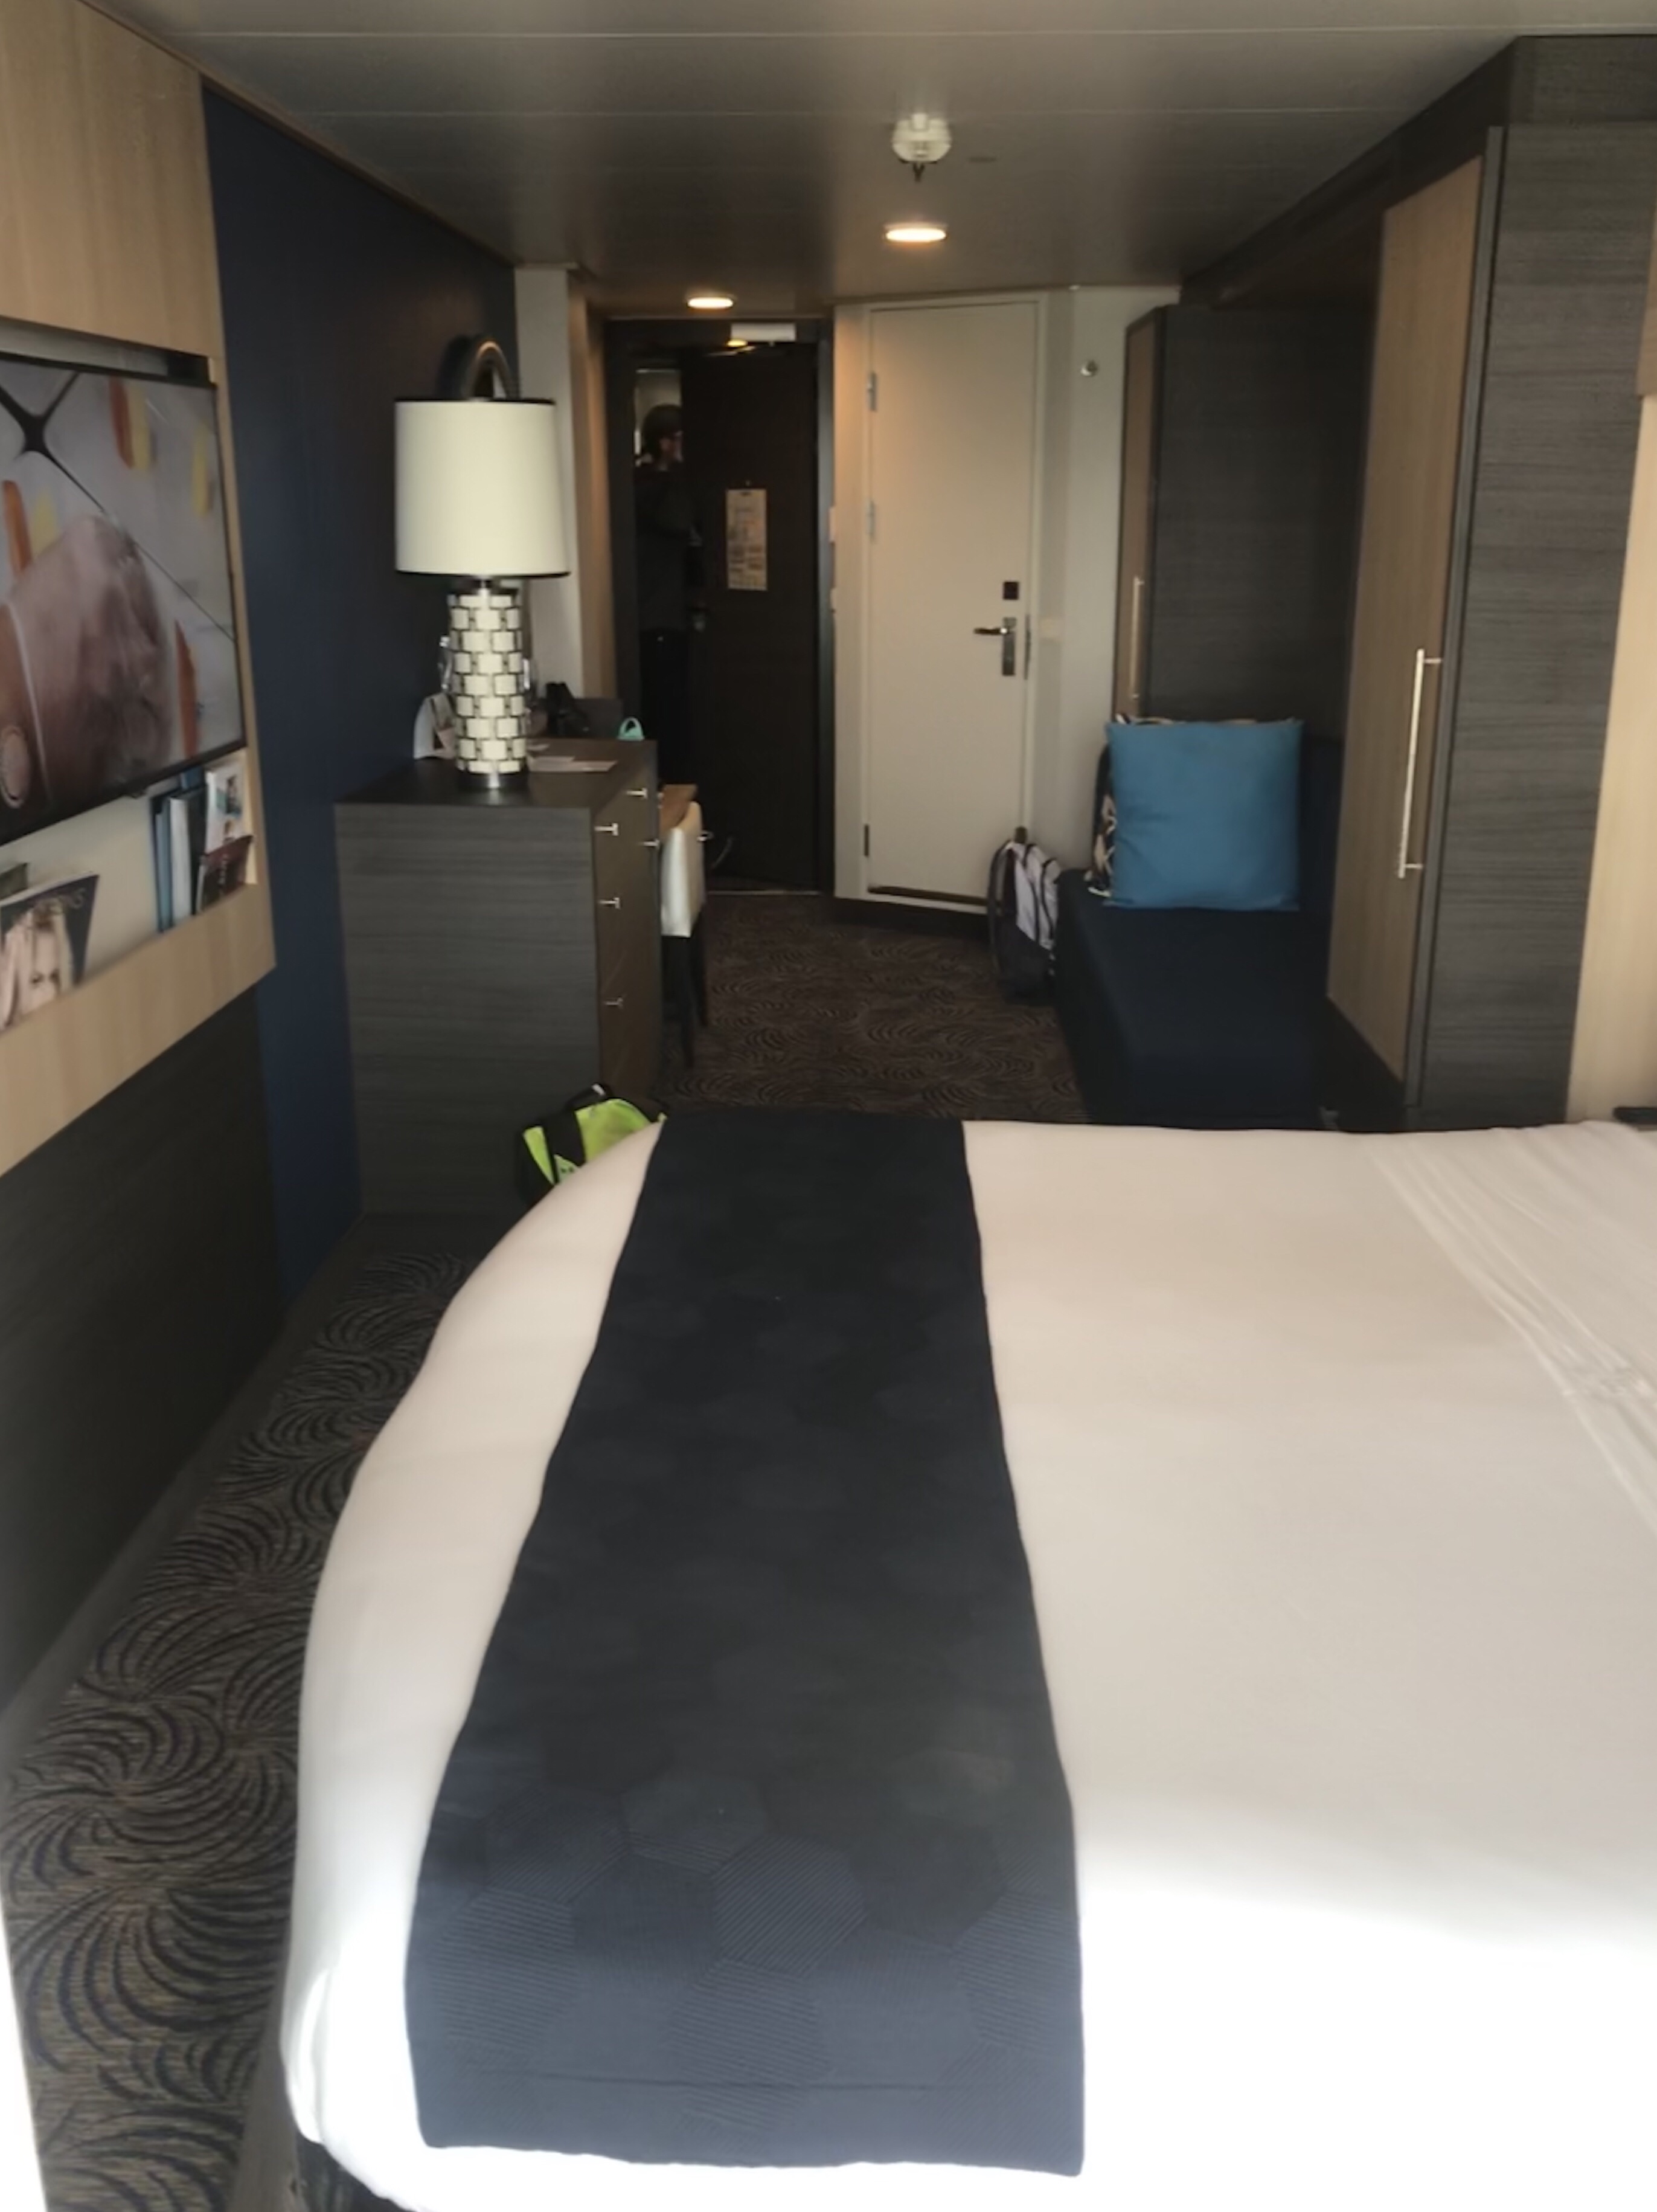 Royal Caribbean Anthem of the Seas Room Review